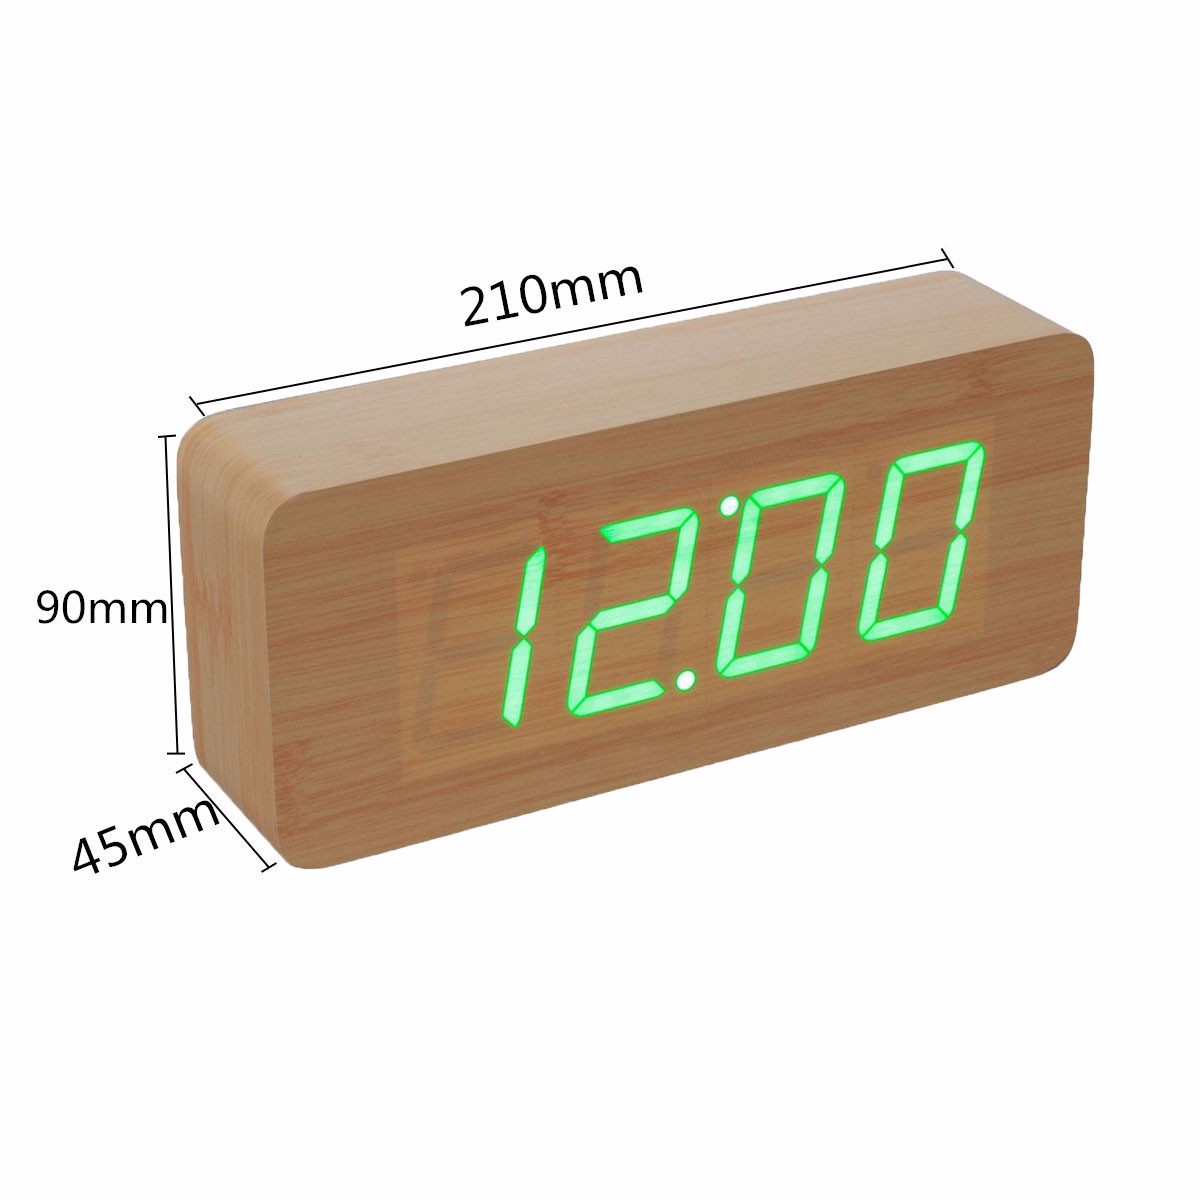 Multifunctional-Wooden-Digital-Clock-Two-Modes-Default-Display-Time-Built-in-Battery-Voice-Control-S-1891907-7